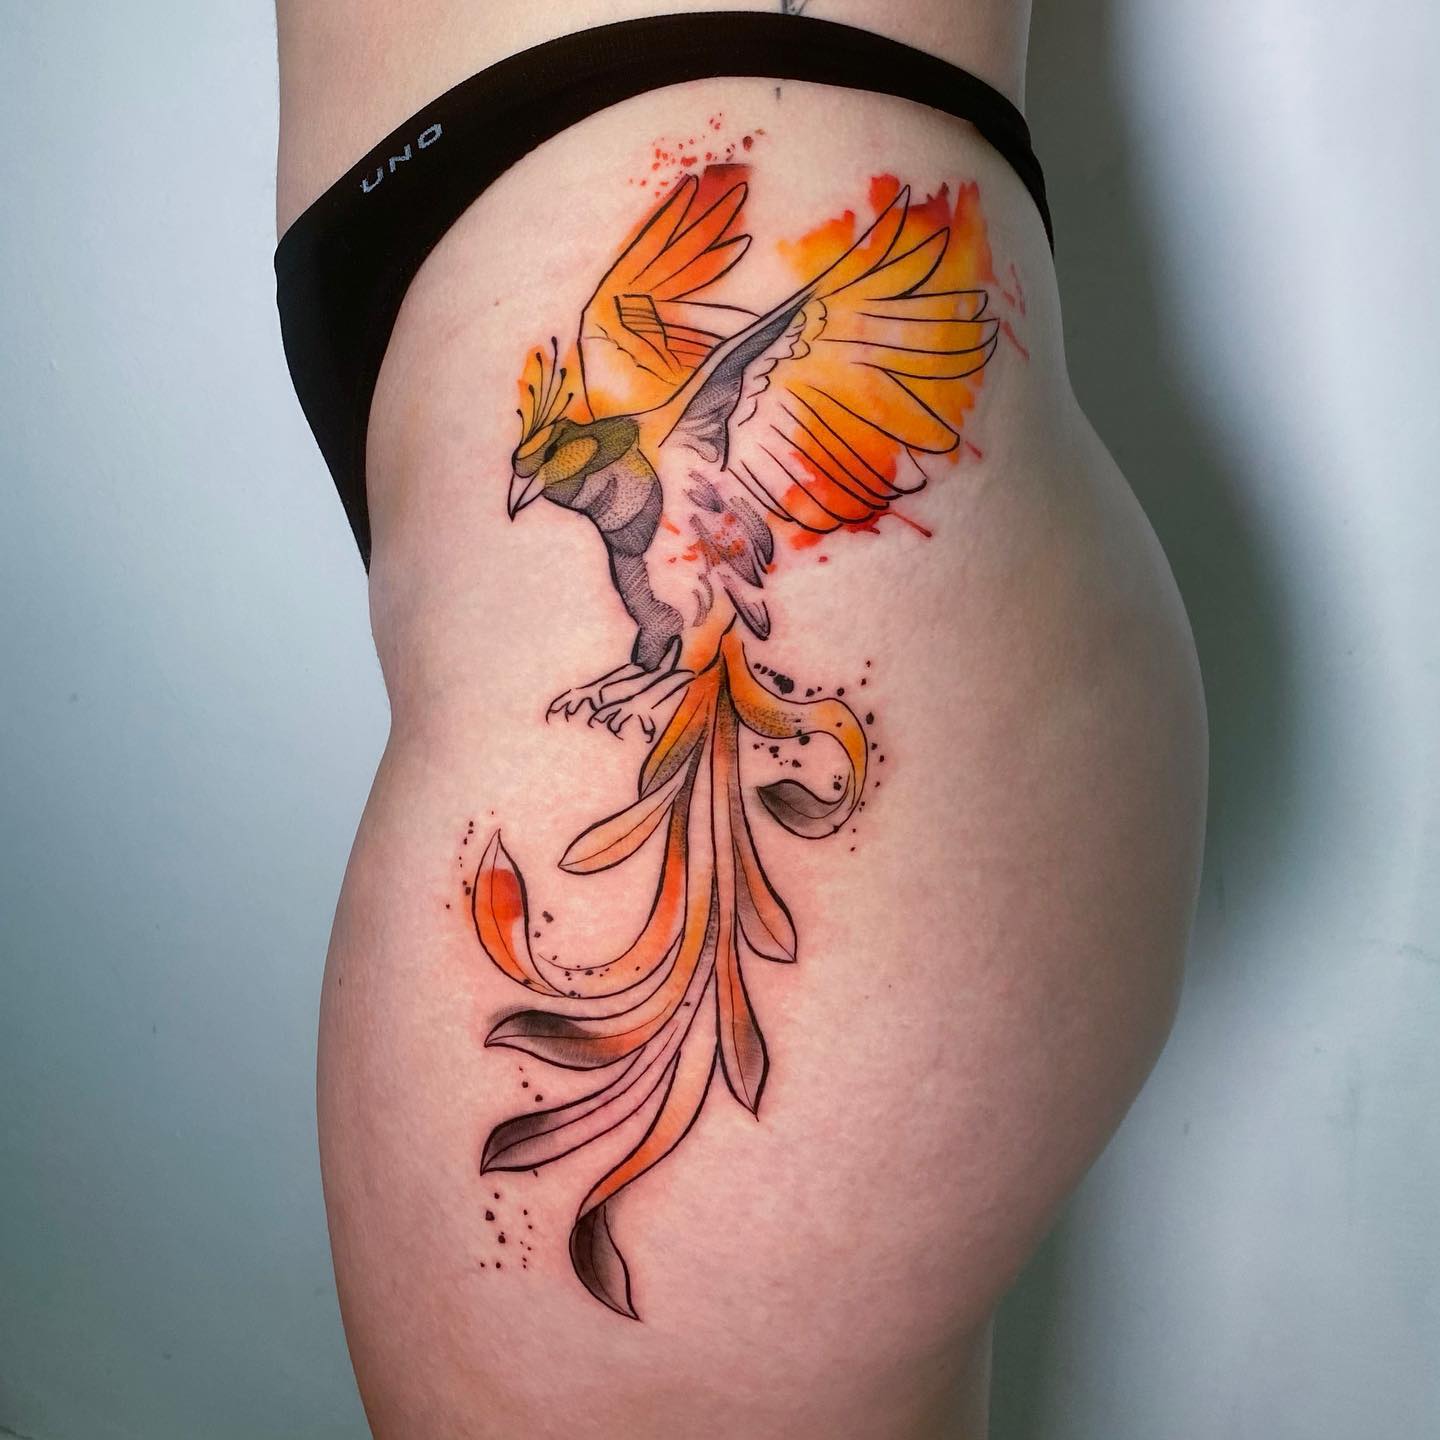 Cool thigh or hip tattoo that you’re going to enjoy if you’re into larger ideas. This bird design and Phoenix print will show your great and extravagant bold personality. If you’re a fan of cool and elegant ideas this will suit your character.